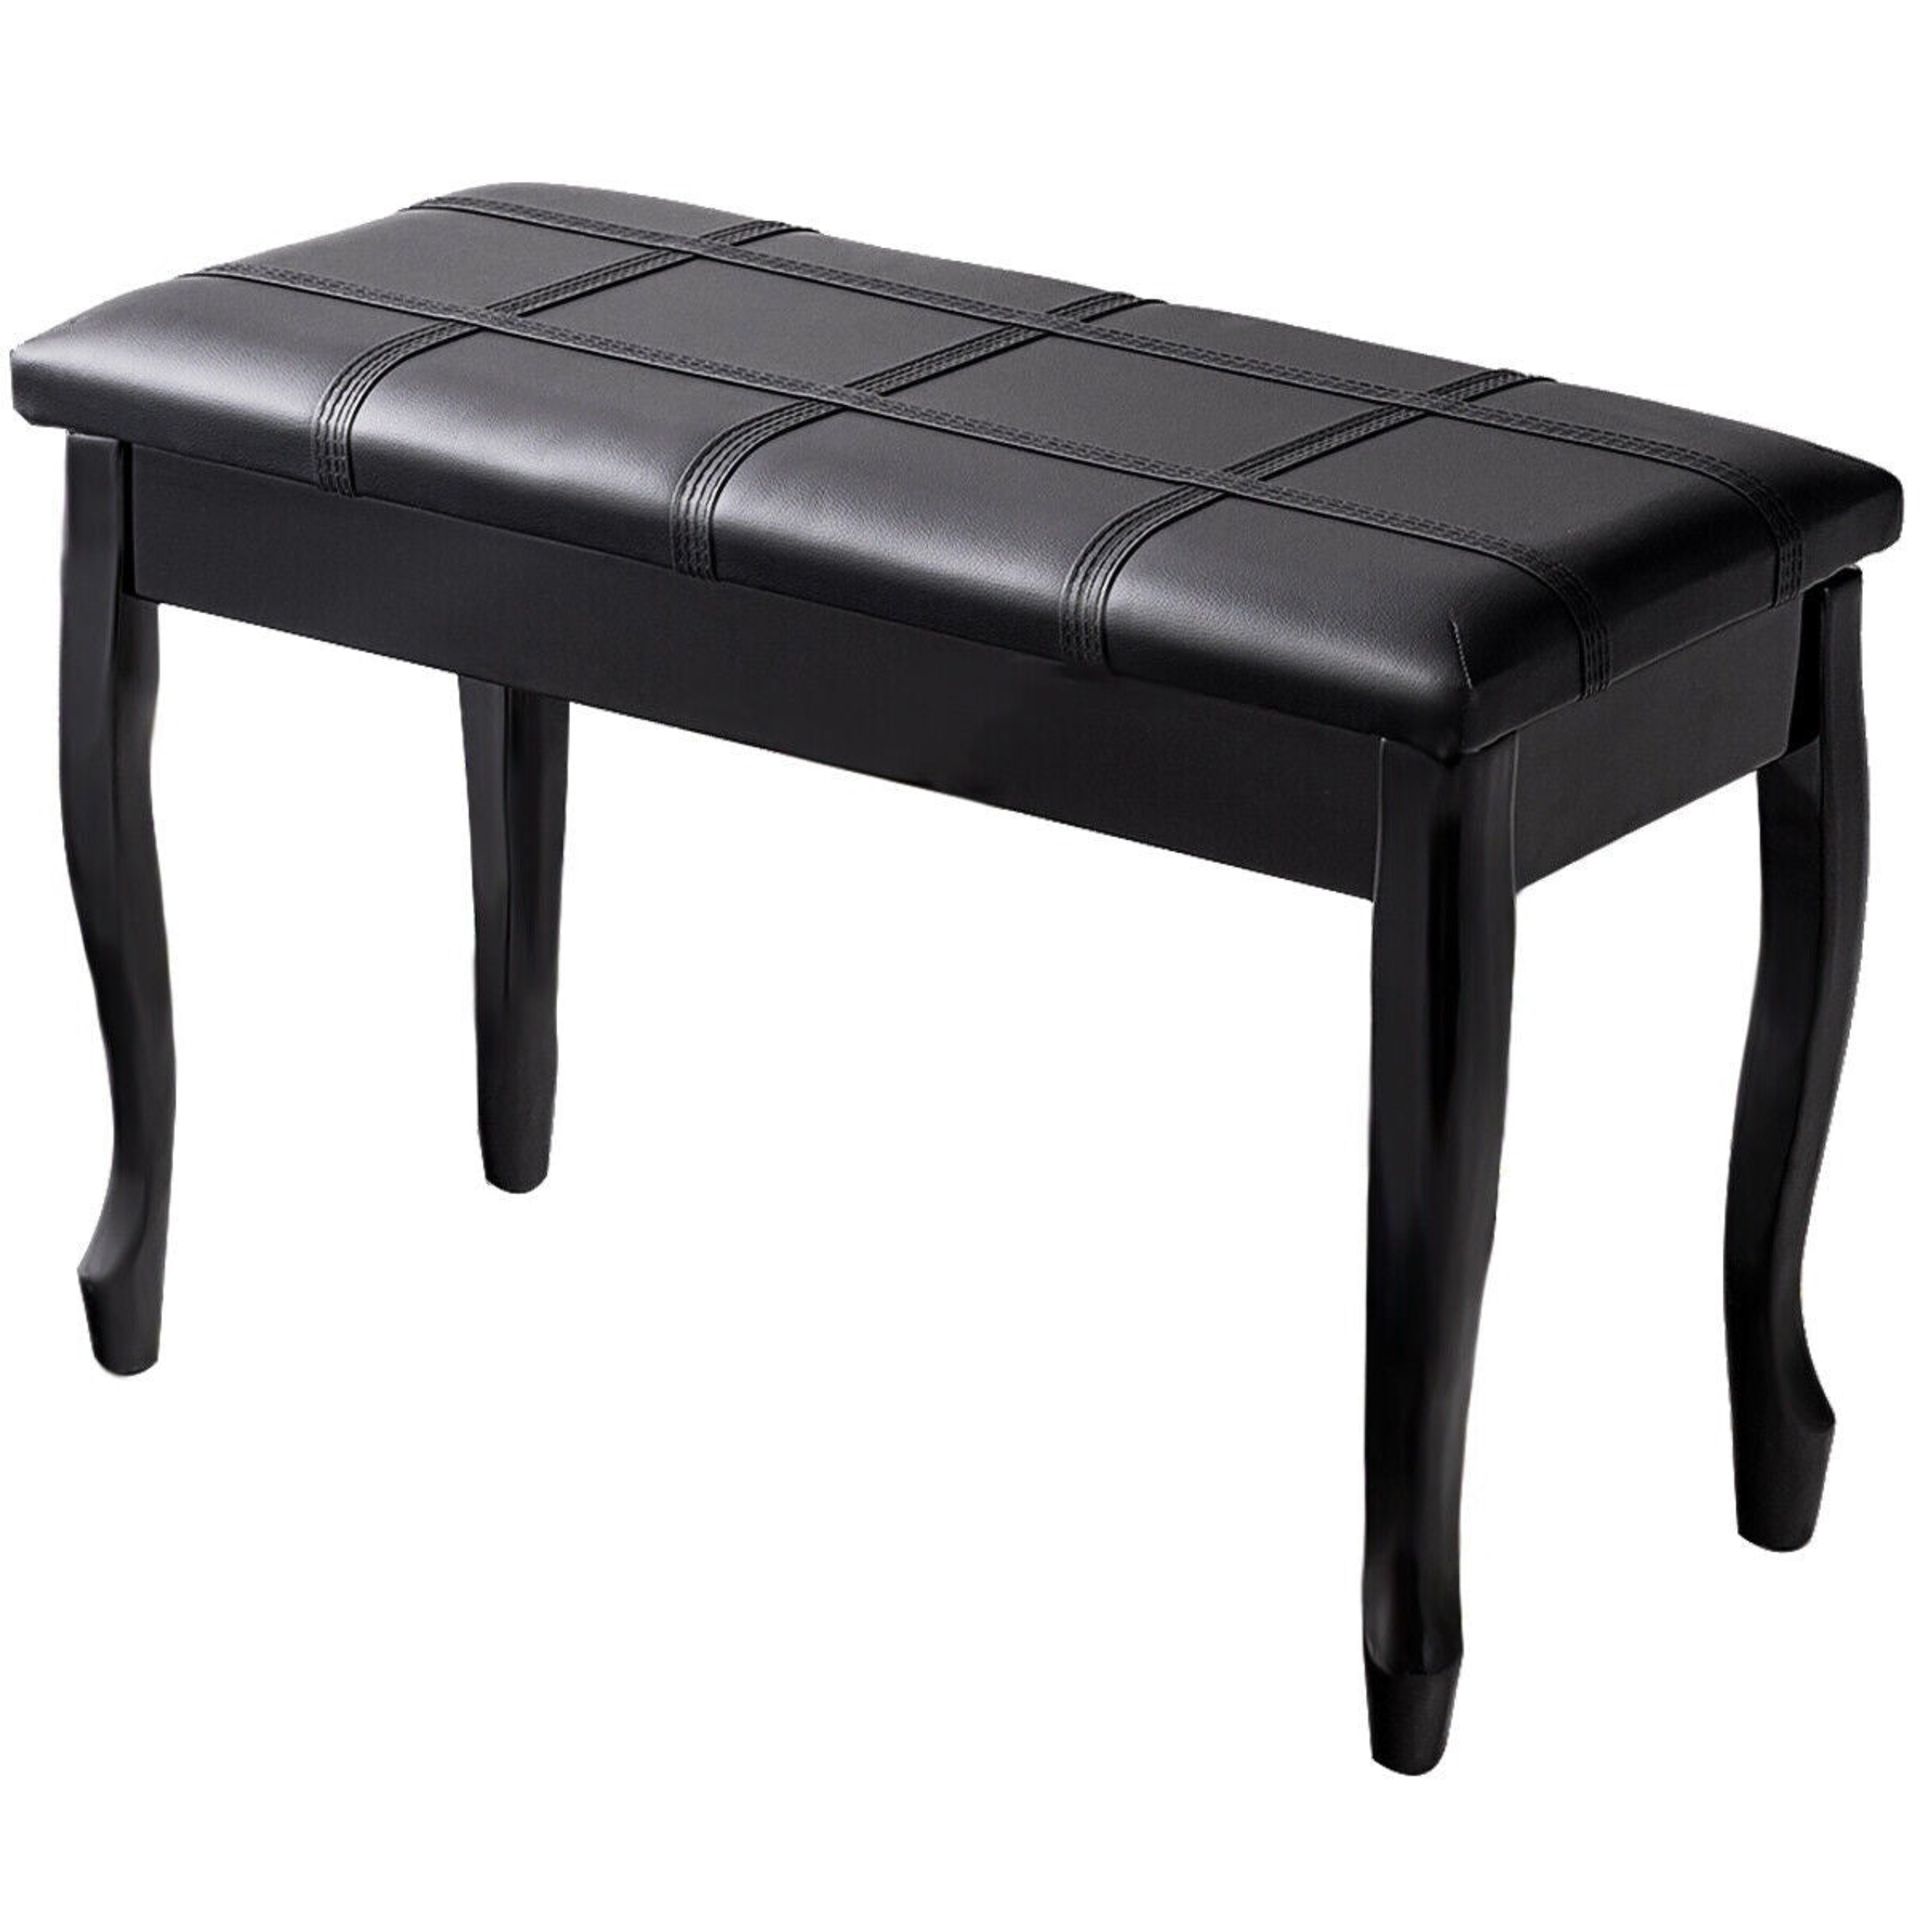 Solid Wood Pu Leather Piano Bench With Storage-black - ER53